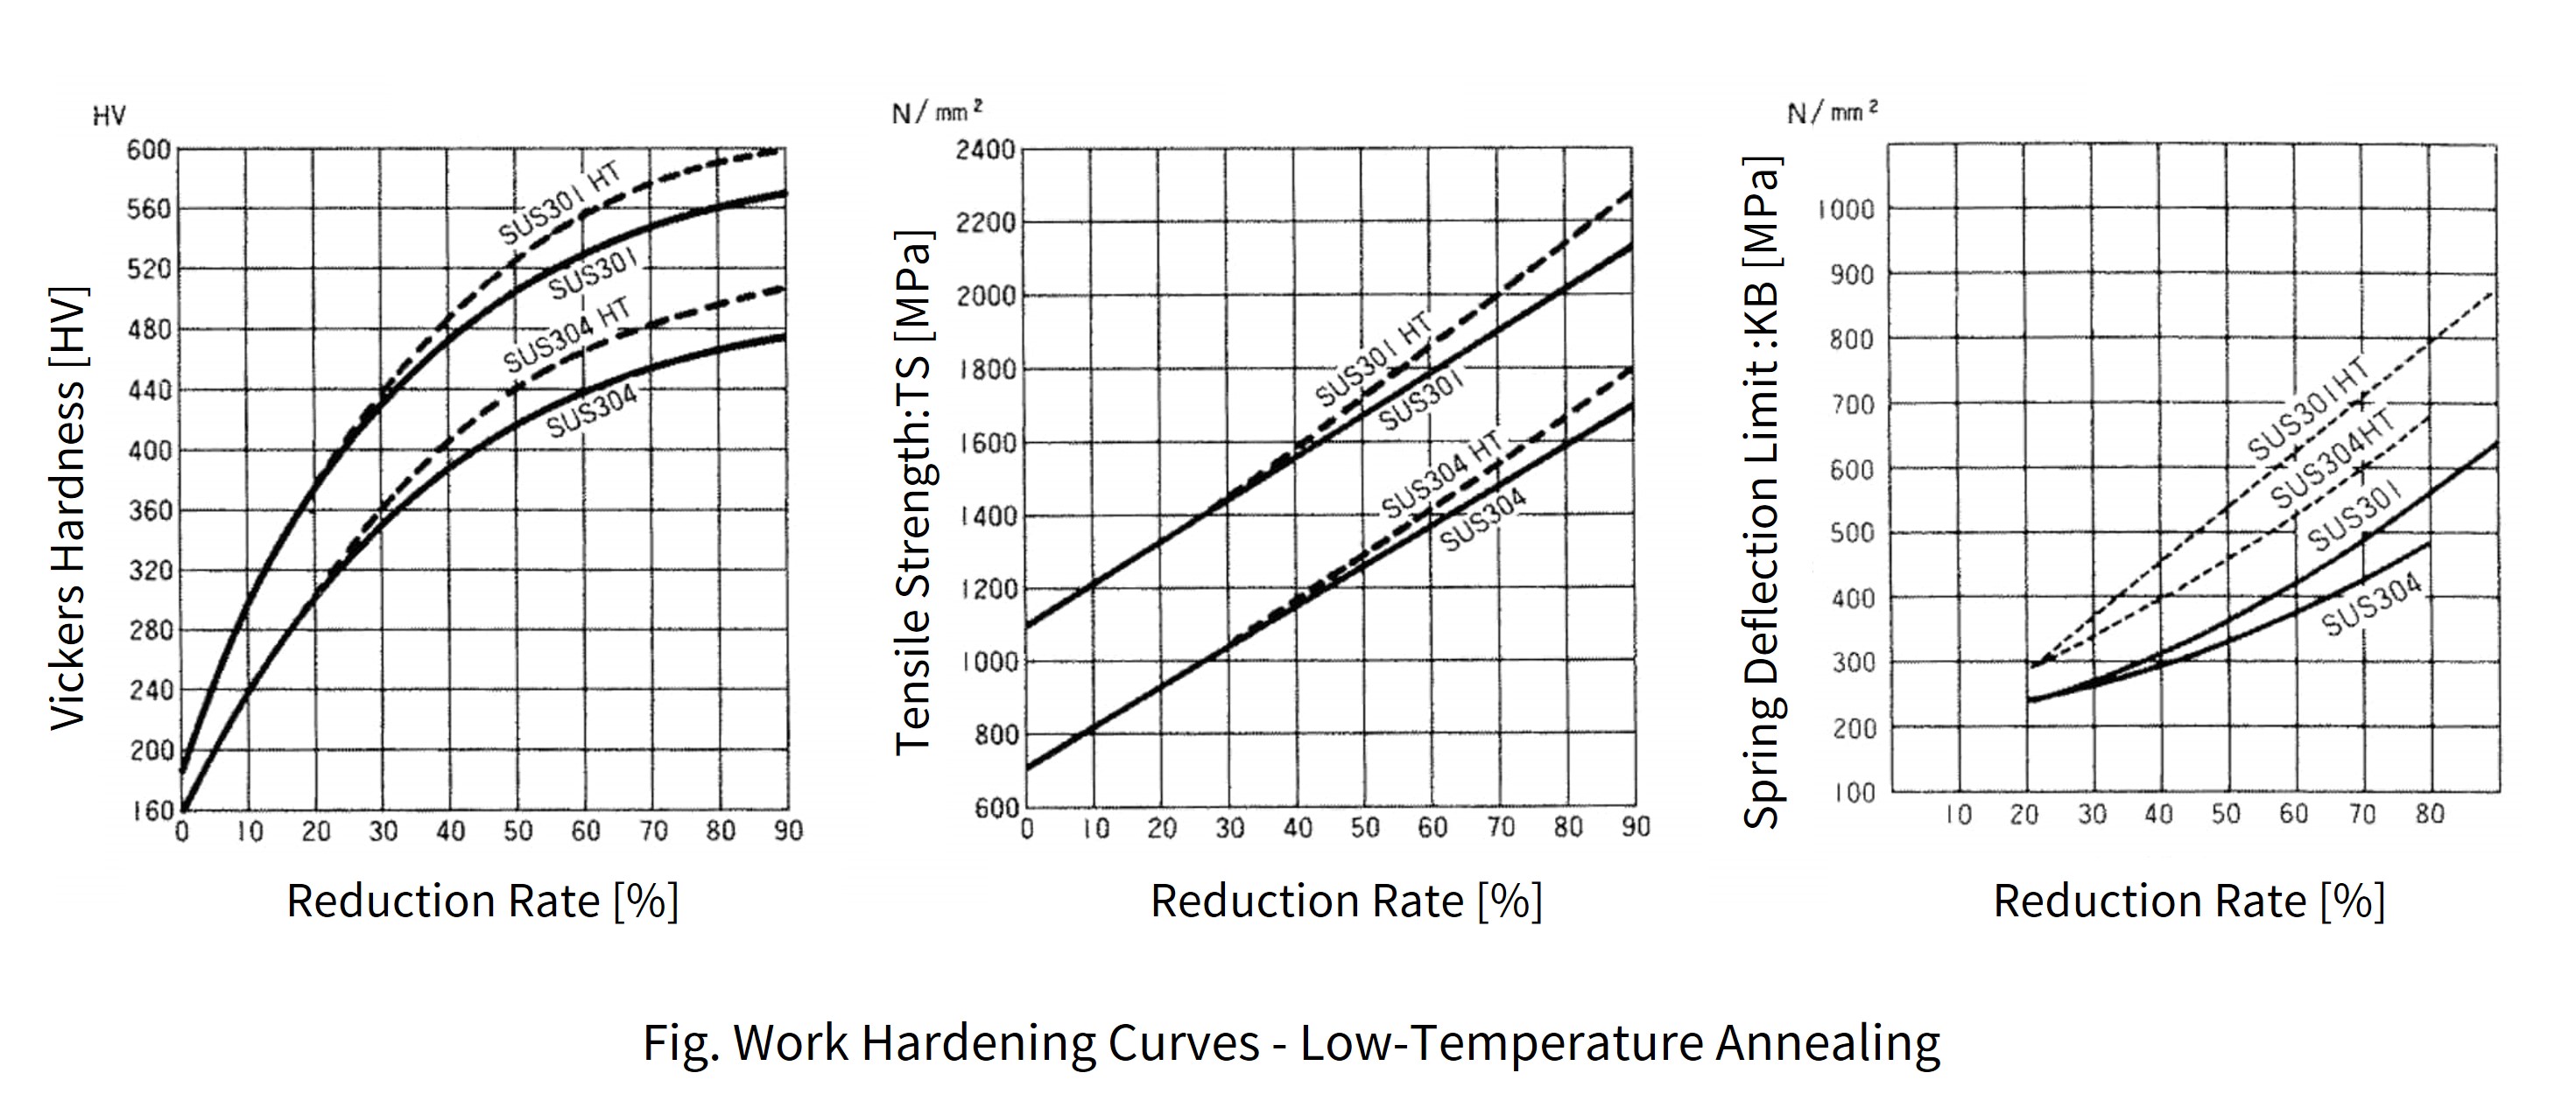 Fig. Work Hardening Curves - Low-Temperature Annealing